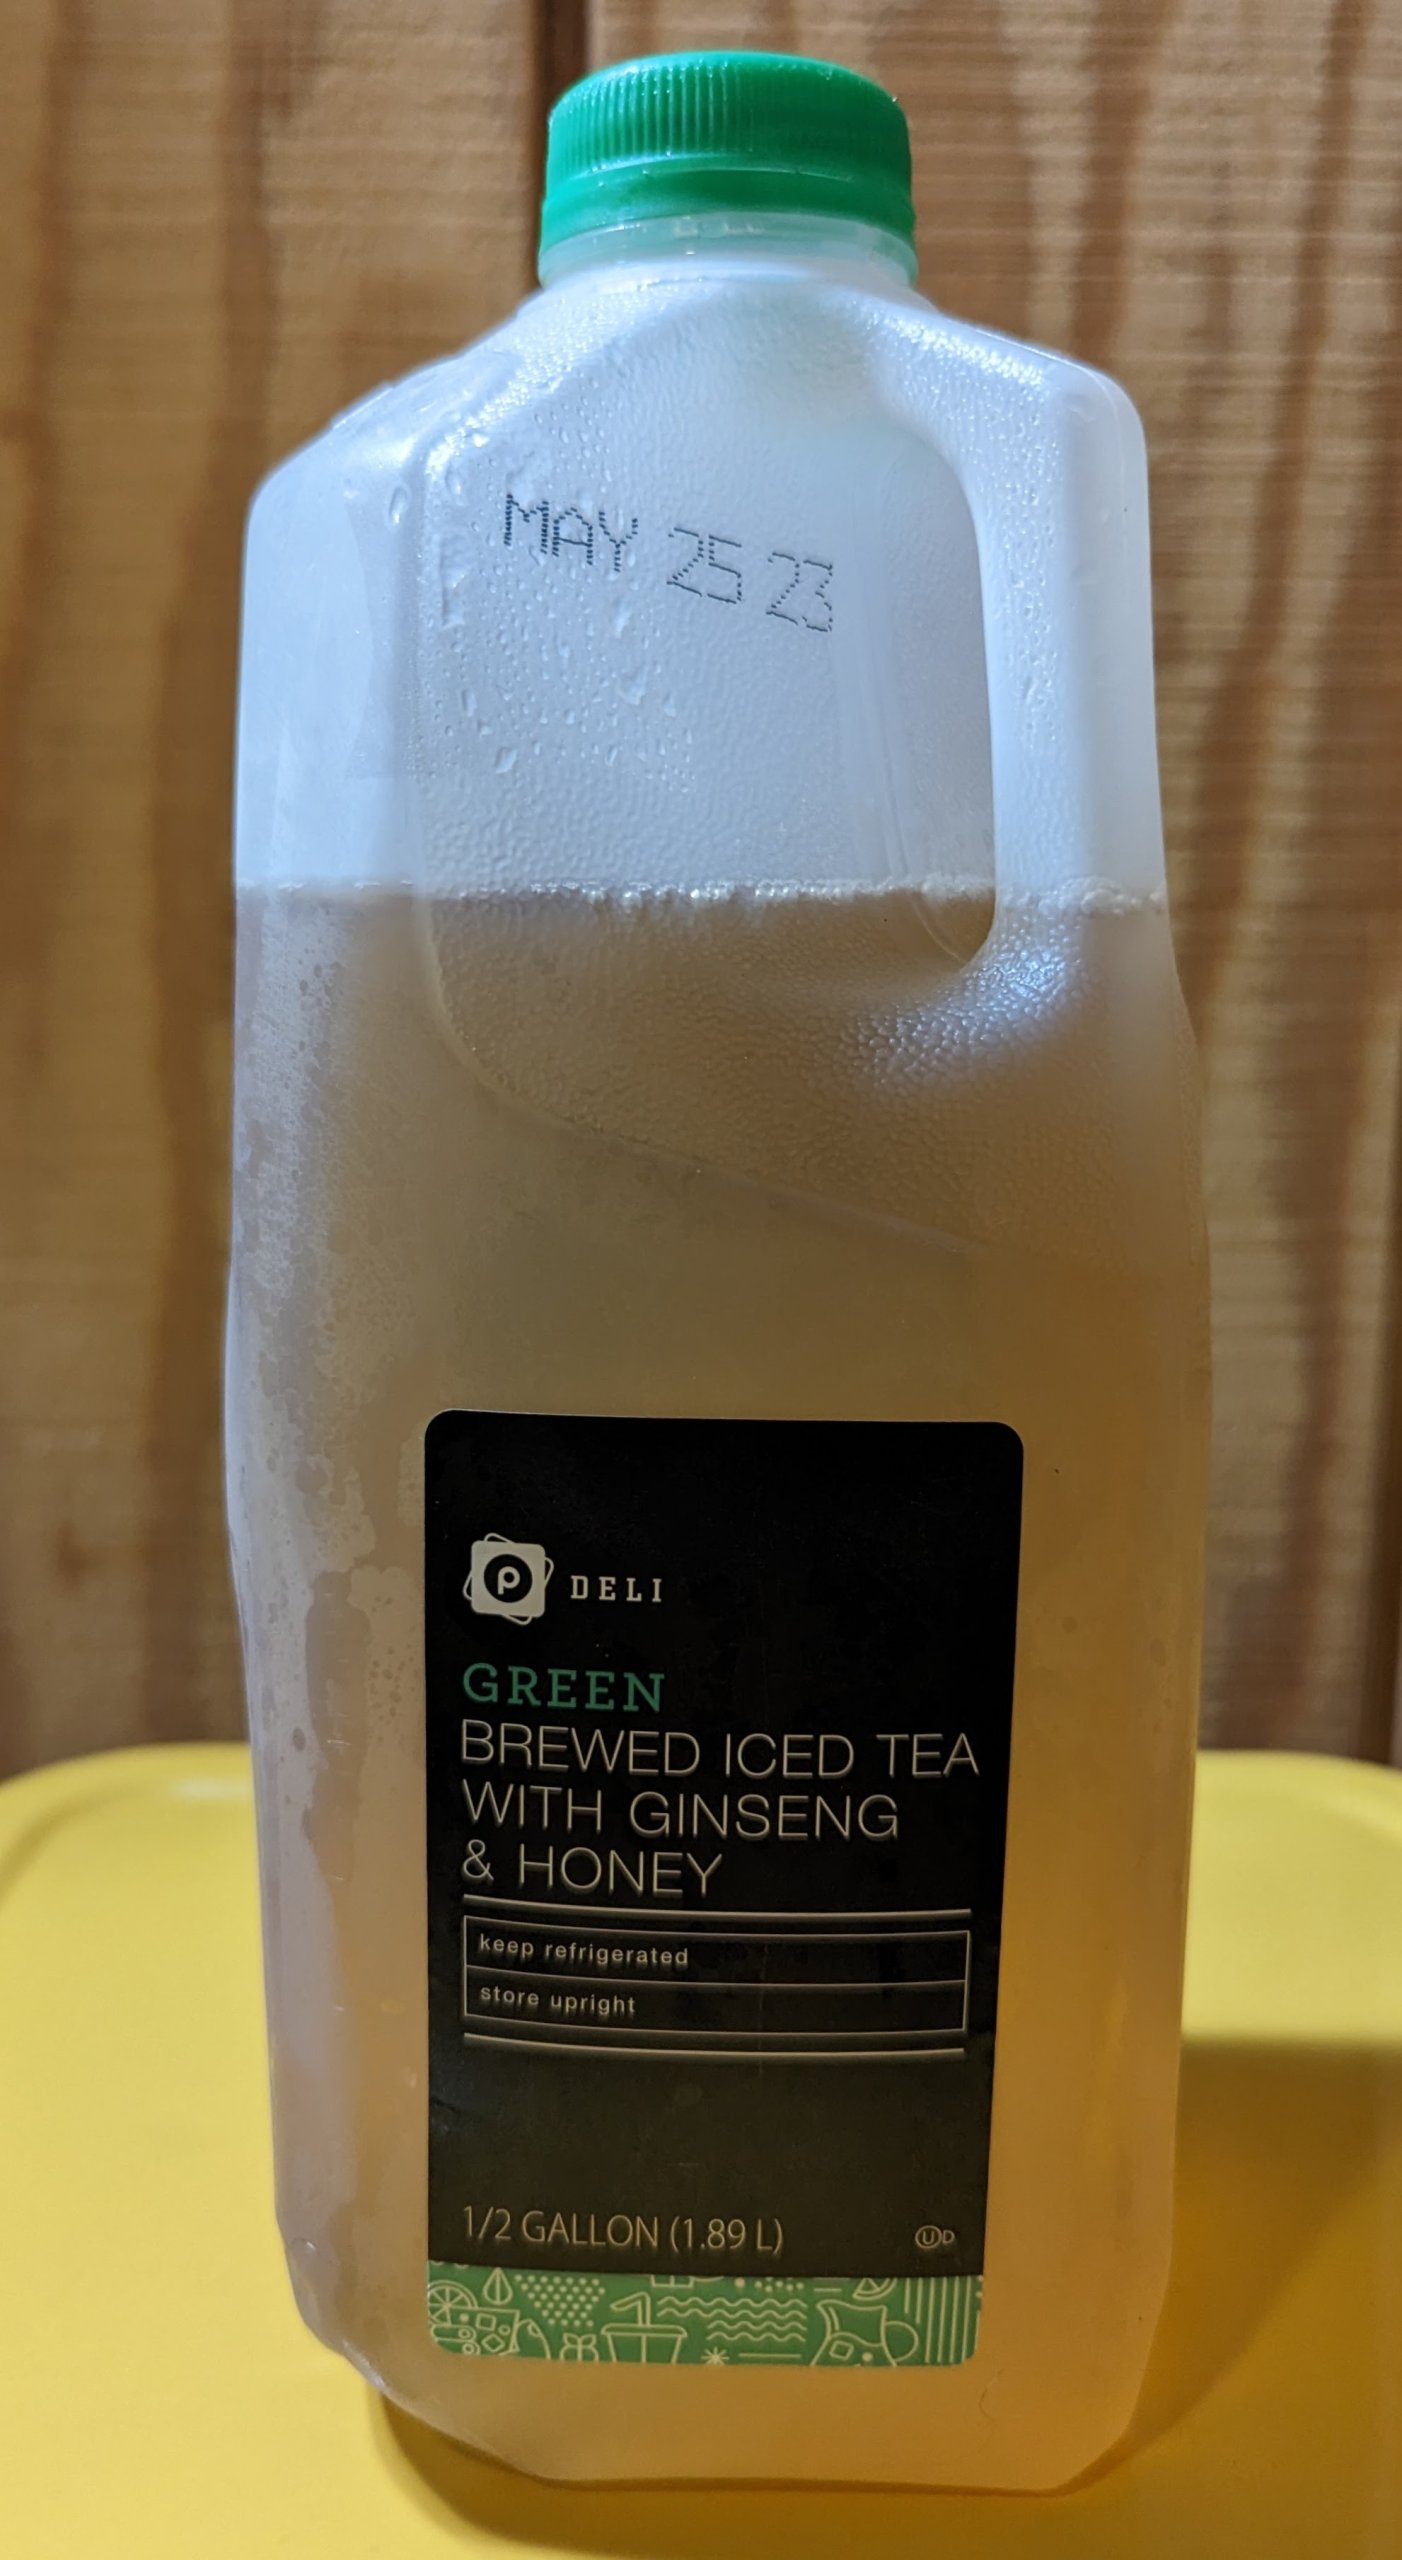 You are currently viewing Publix Deli Green Brewed Iced Tea with Ginseng and Honey